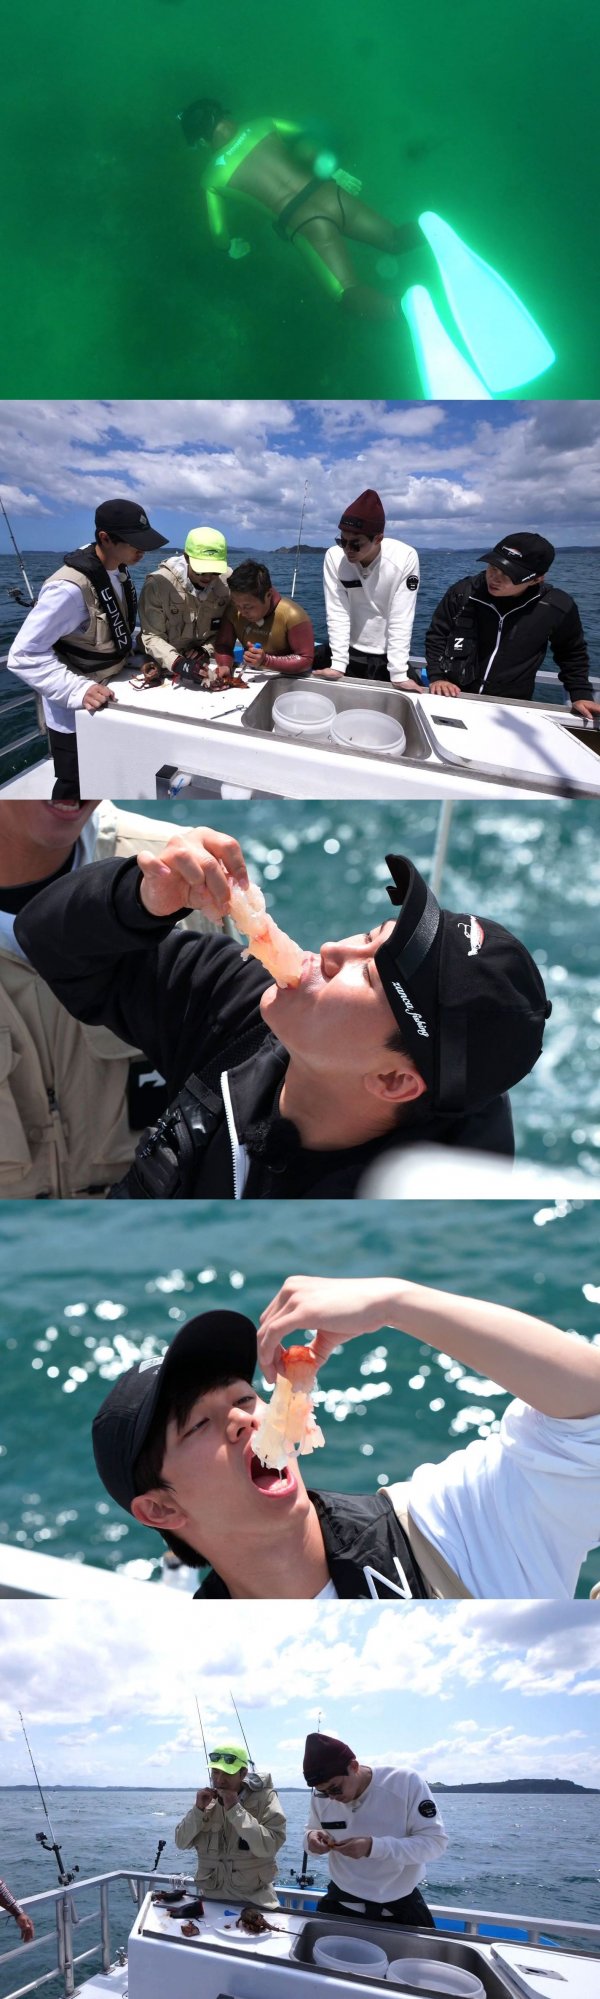 On the 15th broadcast, Kim Byung-man and All The Butlers Lee Seung-gi, Lee Sang-yoon, Yang Sung-jae and Yang Se-hyeong challenged fishing on a yacht in the middle of the New Zealand sea.In particular, Kim Byung-man caught the eye by diving fishing to catch the Lay fish that the members wanted so much.The expectation of the members has deepened even more because it is a big fish that can feel the best taste of nature.Kim Byung-man then removed the Lay fish with his bare hands and handed it to the members and showed a sweet aspect.In the meantime, the members admired the taste of the first Lay fish.In particular, Lee Sang-yoon and Lee Seung-gi are the back door of the master by showing the food that sucks up to the skin attached to the skin.On the other hand, the members of the day are said to have had a struggle with King Fish, who met at the New Zealand Sea, for a lifetime.Lee Sang-yoon, who was holding a fishing rod at the power of King Fish, which was a meter long, suffered a severe aftereffect.After a confrontation that made the hand sweat, the members wonder if they can catch King Fish.